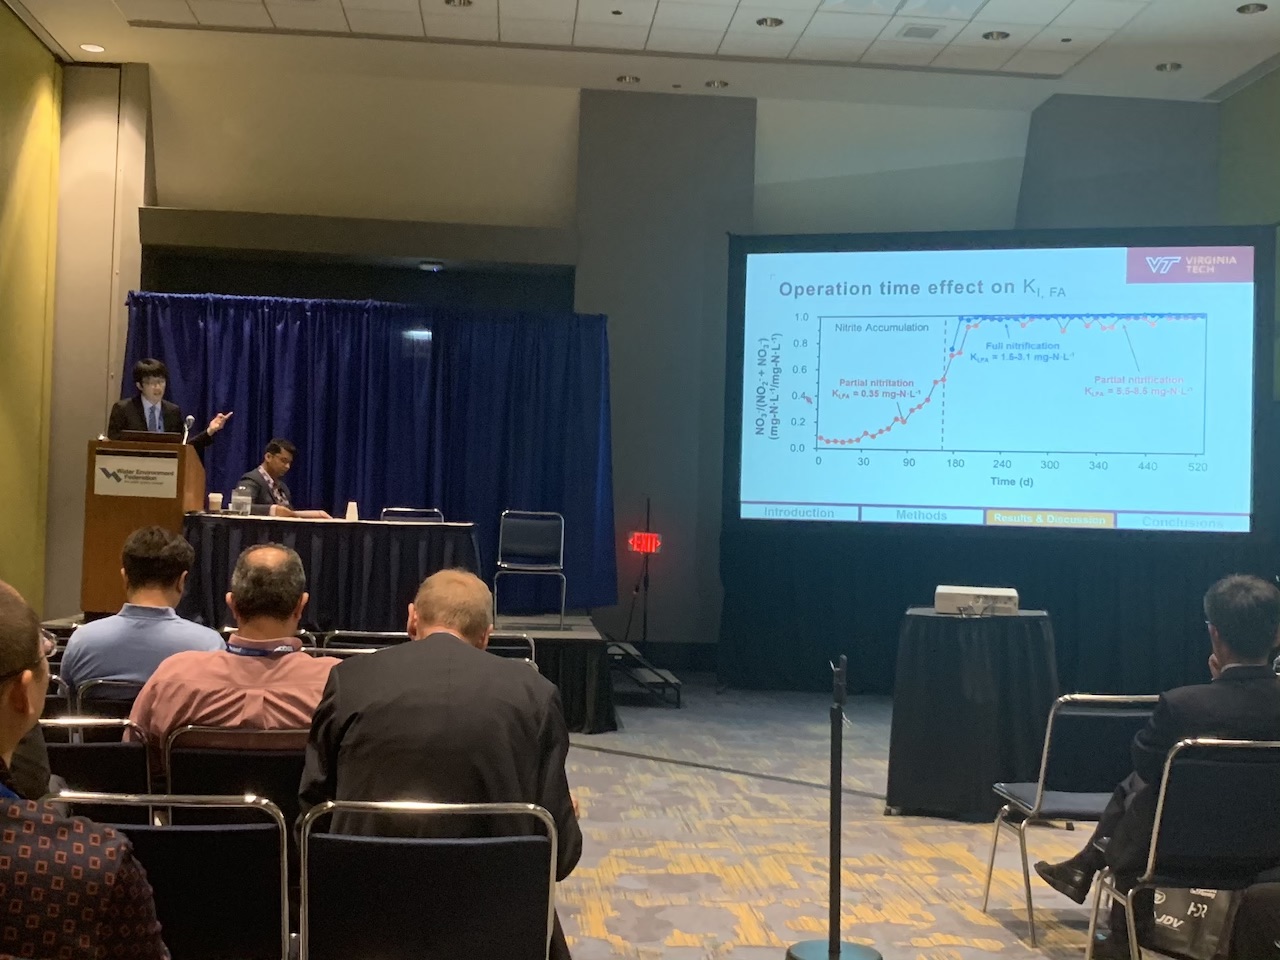 Six oral presentations from our team including a featured speaker one were presented in WEFTEC 2019 in Chicago on Sep 23-25